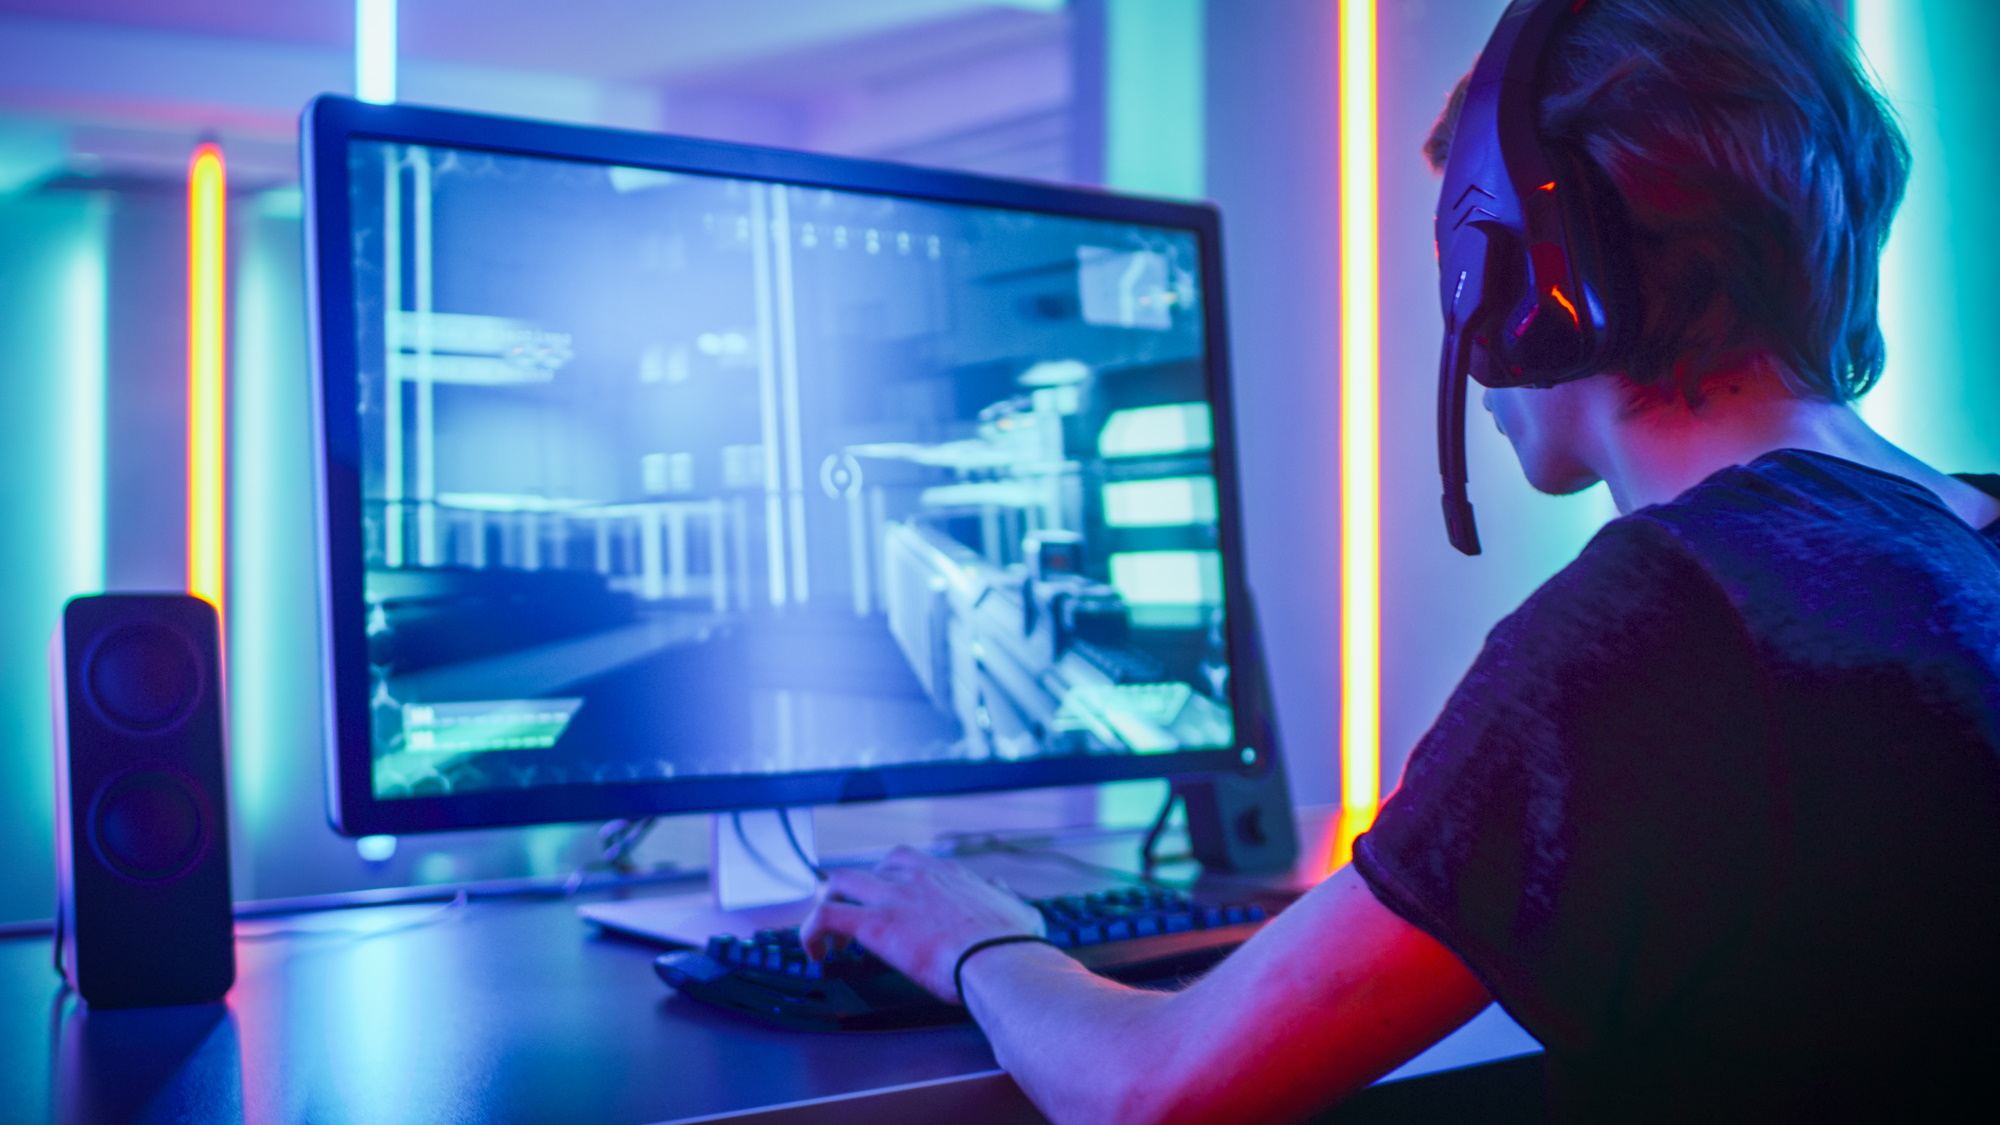 The Best VPNs For Gaming (2019)